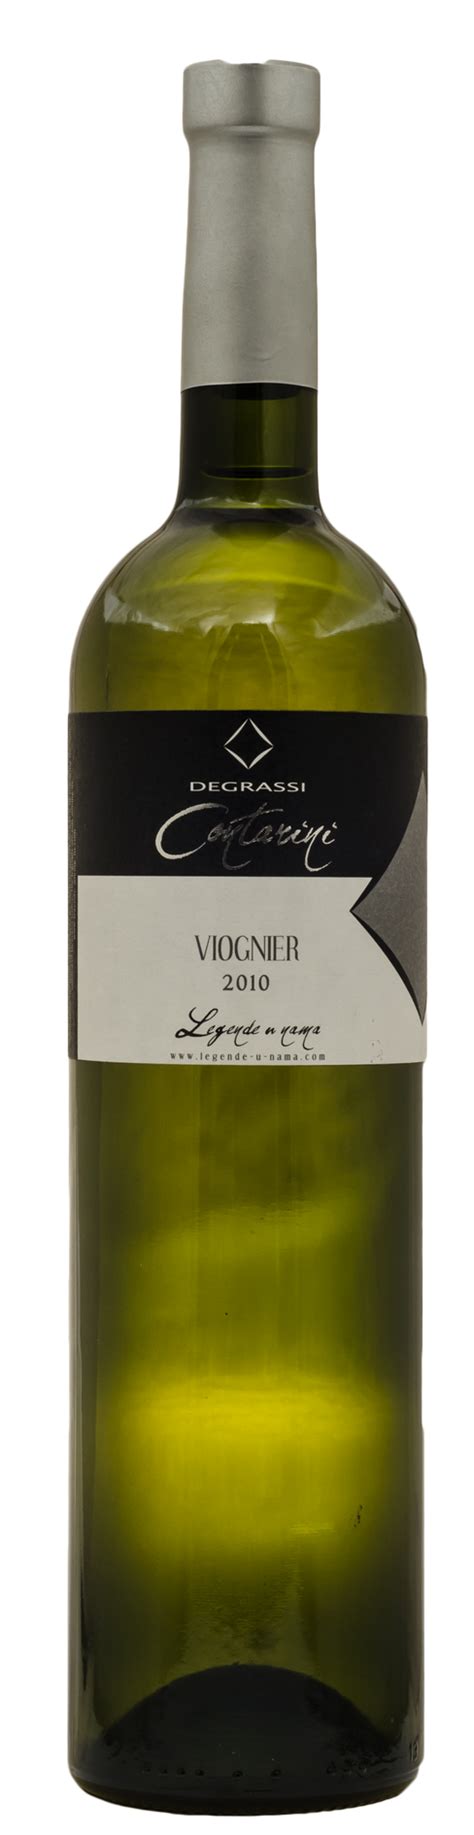 Degrassi Viognier Contarini 2016 Wines Out Of The Boxxx